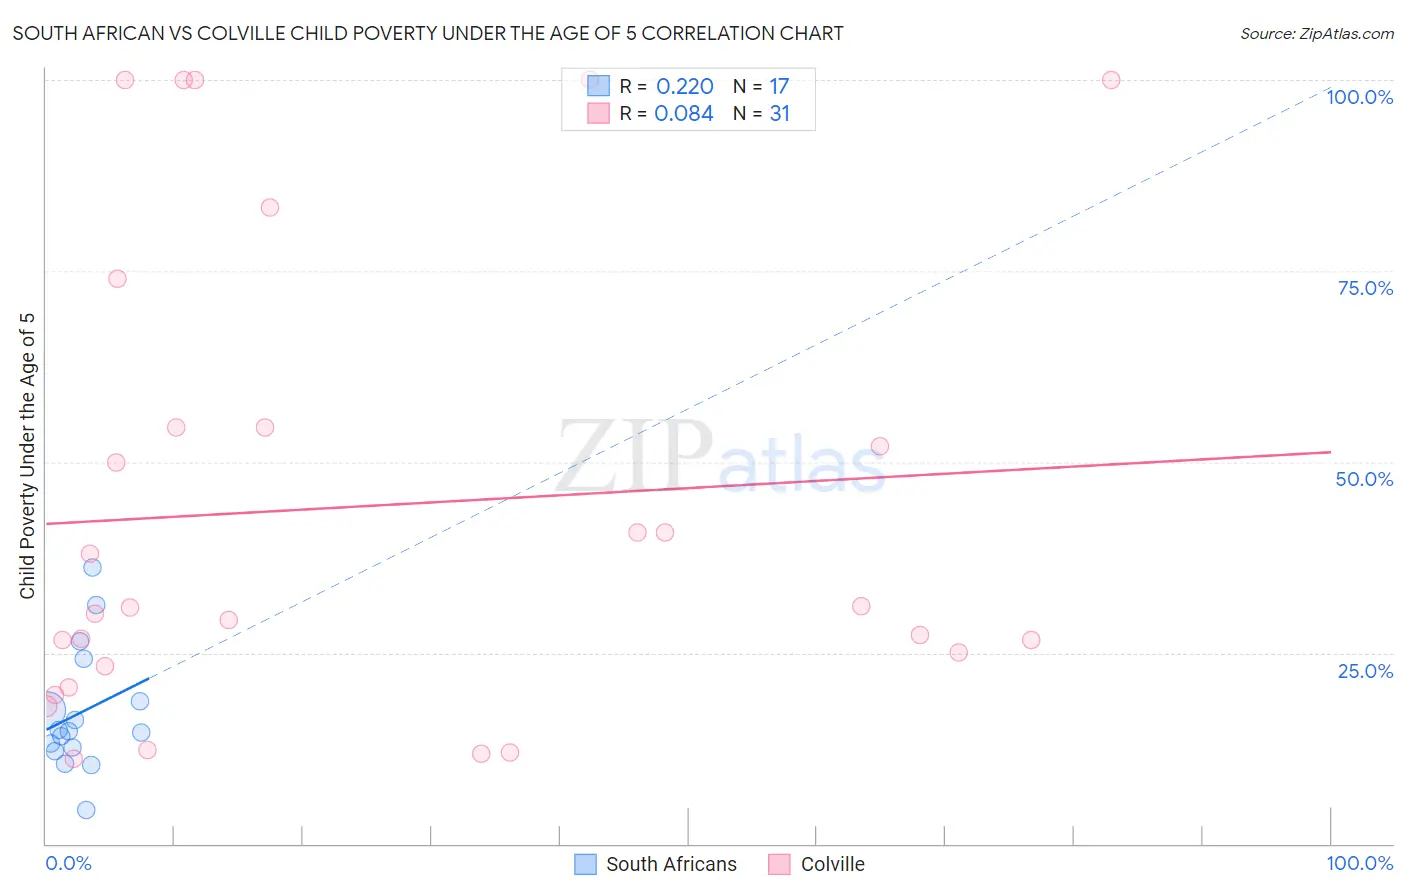 South African vs Colville Child Poverty Under the Age of 5